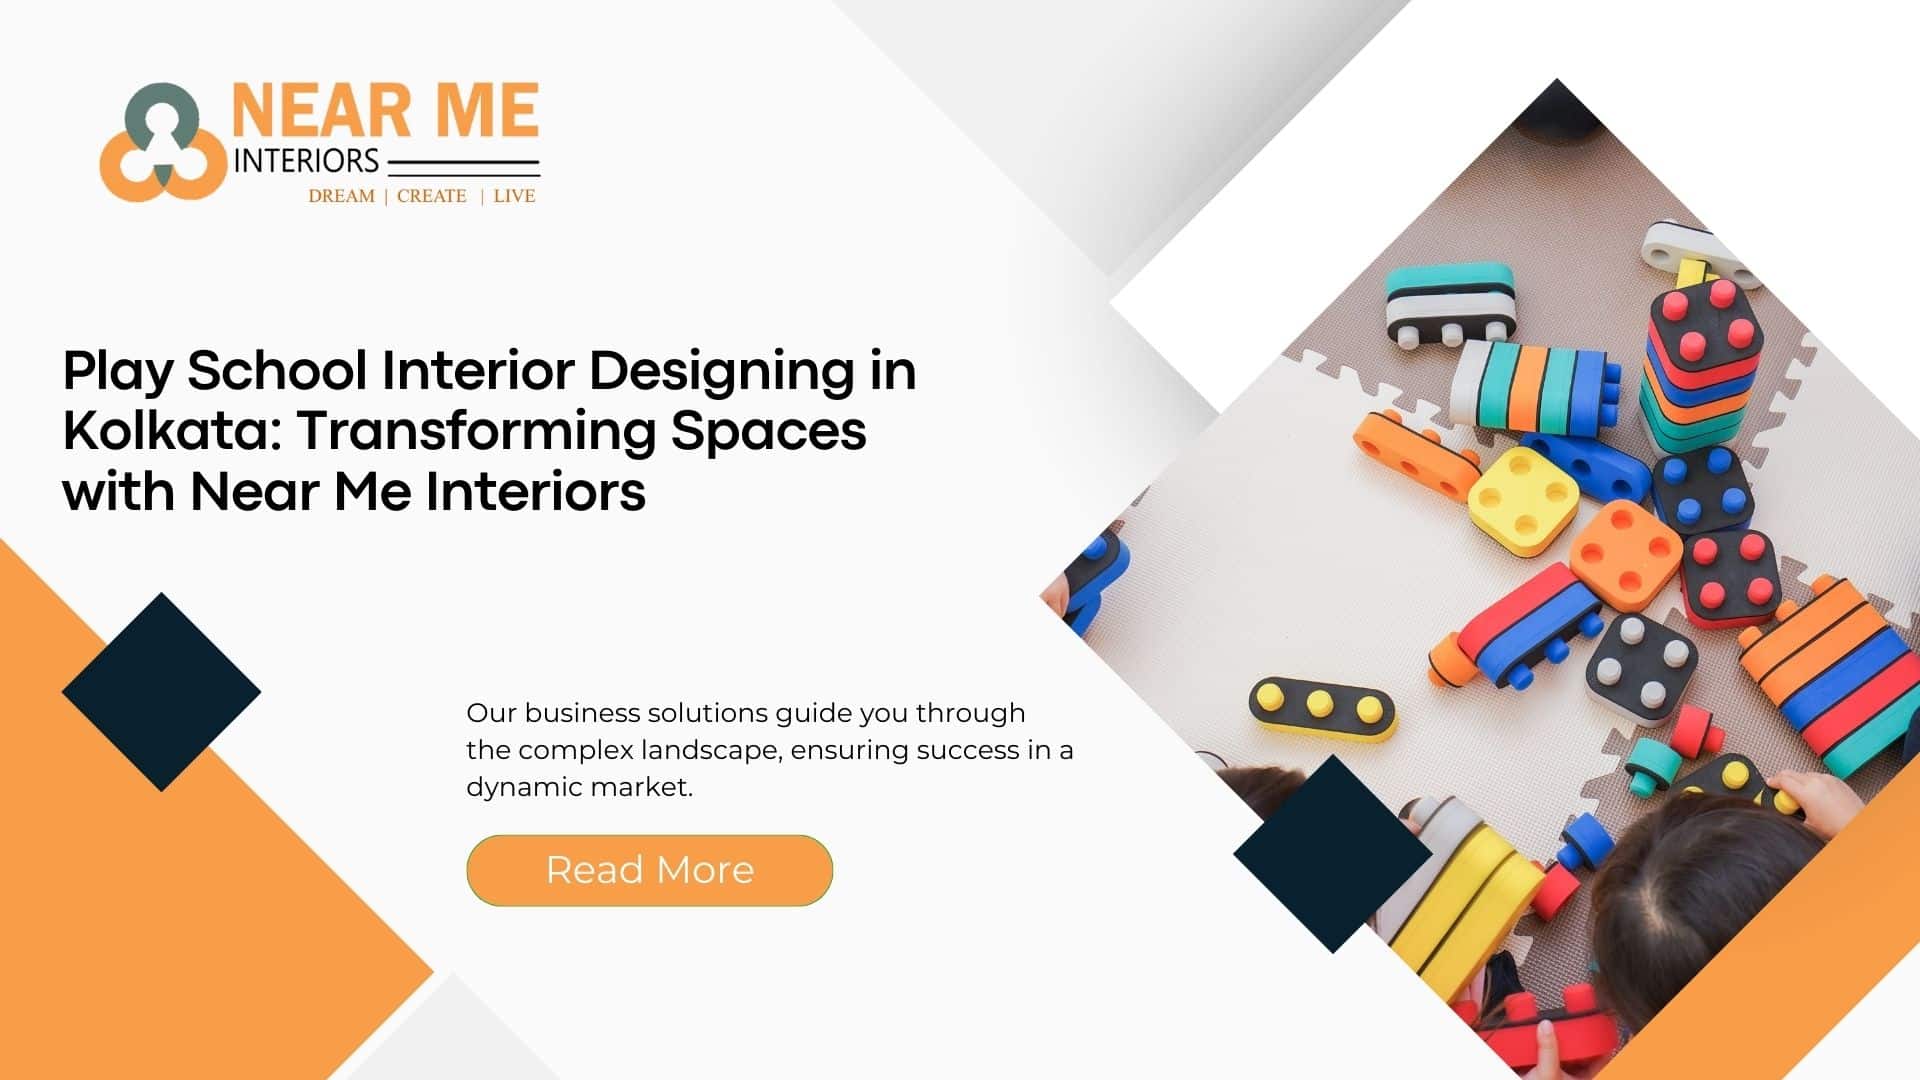 Play School Interior Designing in Kolkata: Transforming Spaces with Near Me Interiors